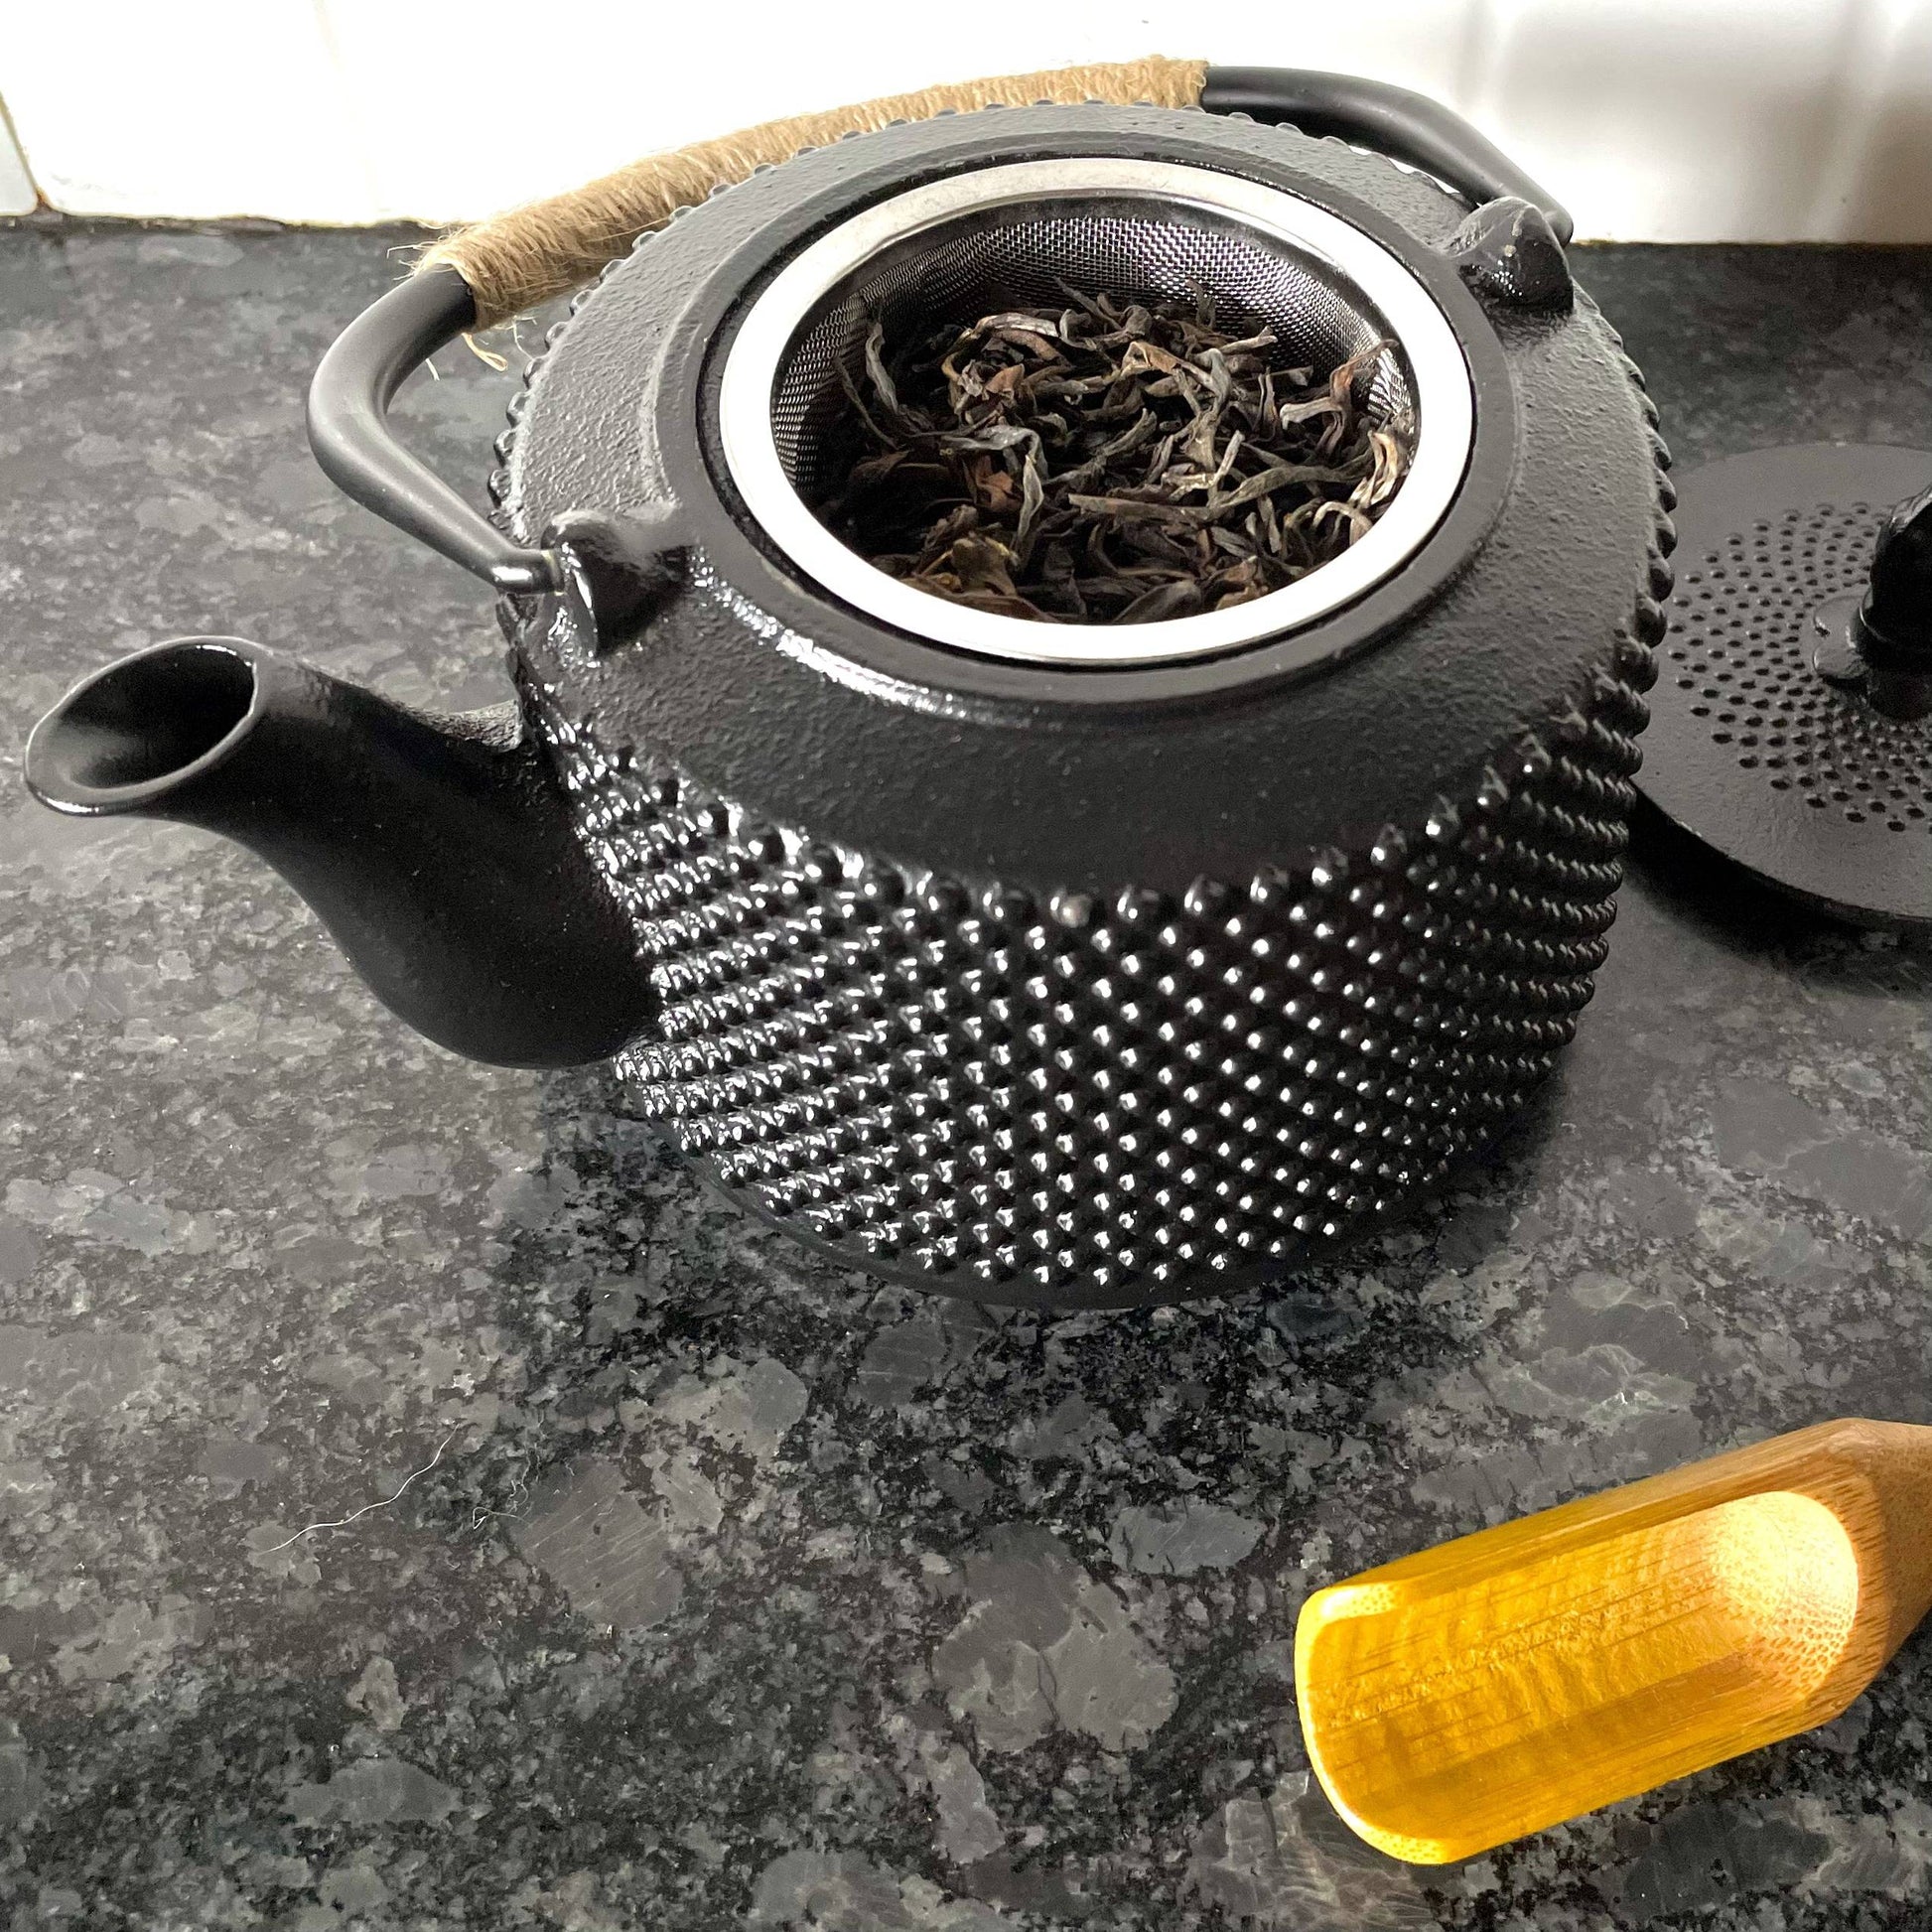 Cast-Iron Hobnail TeaPot - Traditional Japanese Tetsubin (Tetsu-Kyusu Black Arare patterned TeaPot 580ml Lid with Stainless Steel Infuser for Tea Brewing